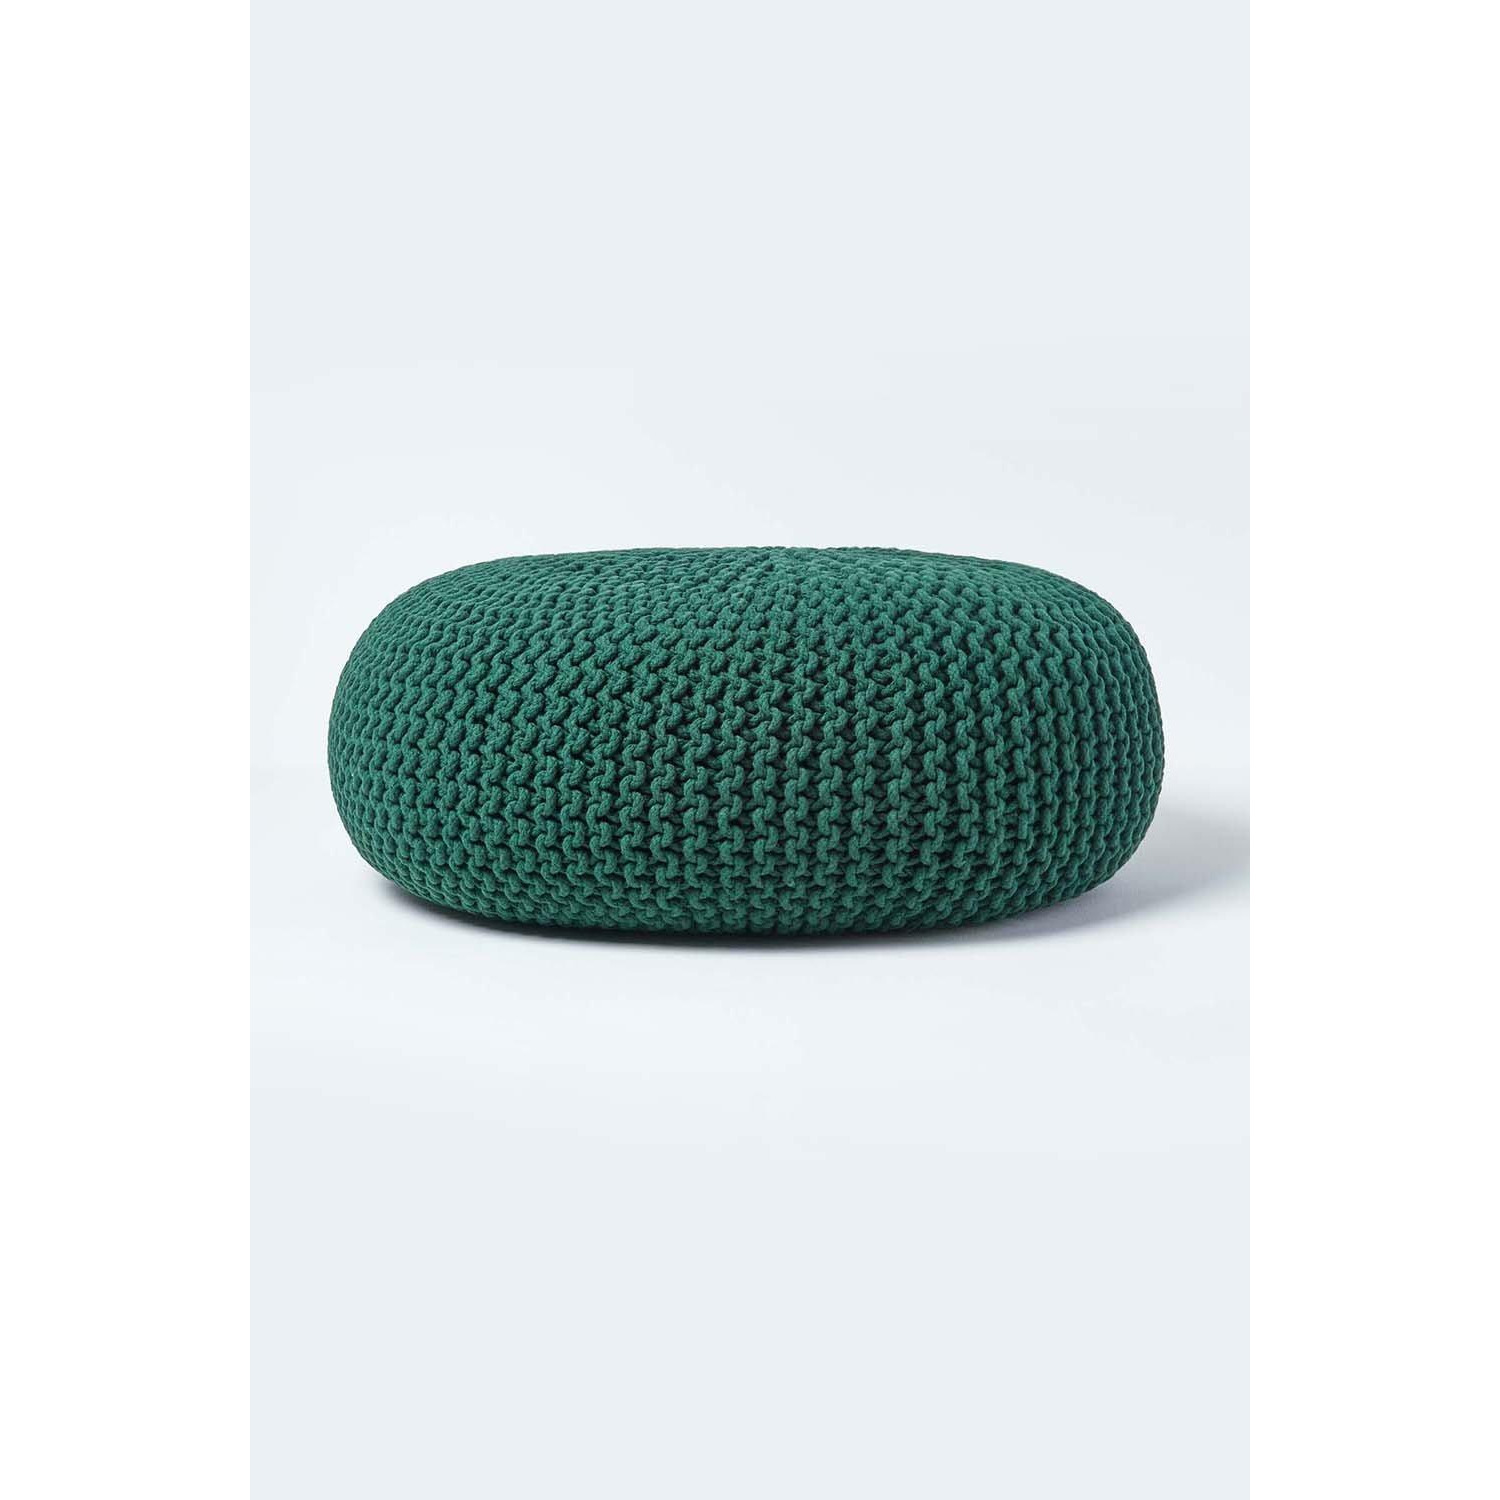 Large Round Cotton Knitted Pouffe Footstool - image 1